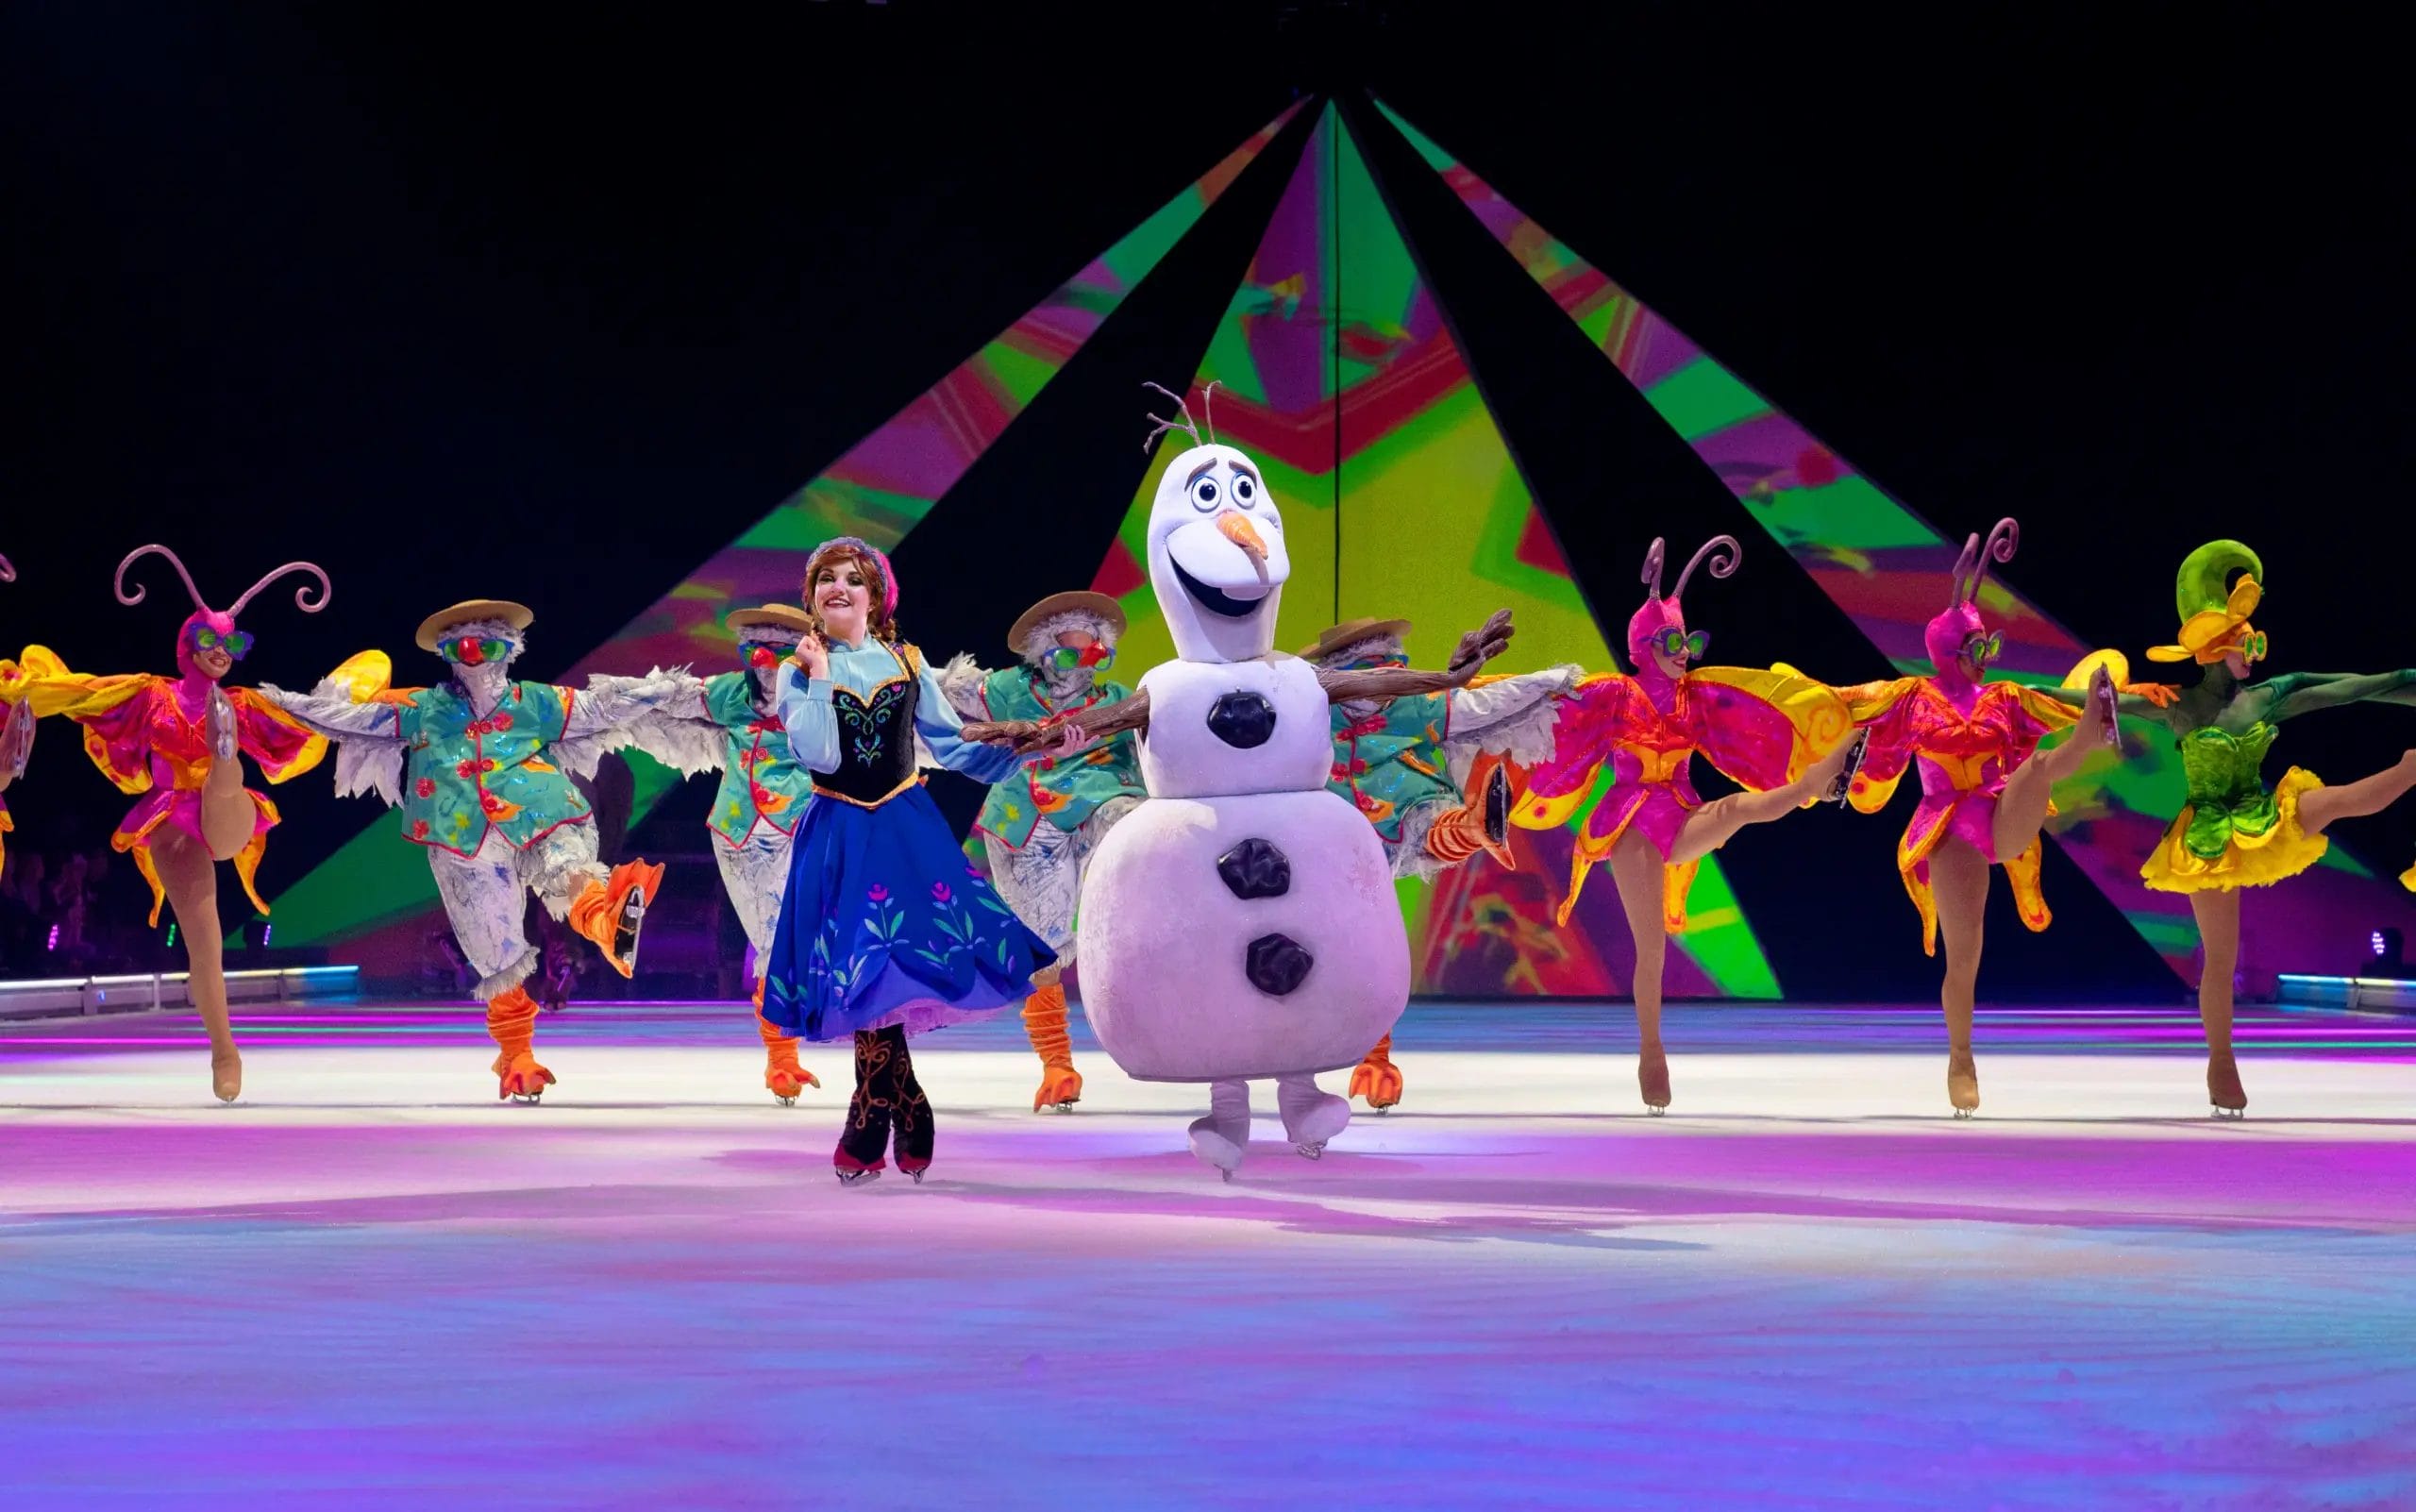 Cars Archives - The Official Site of Disney On Ice